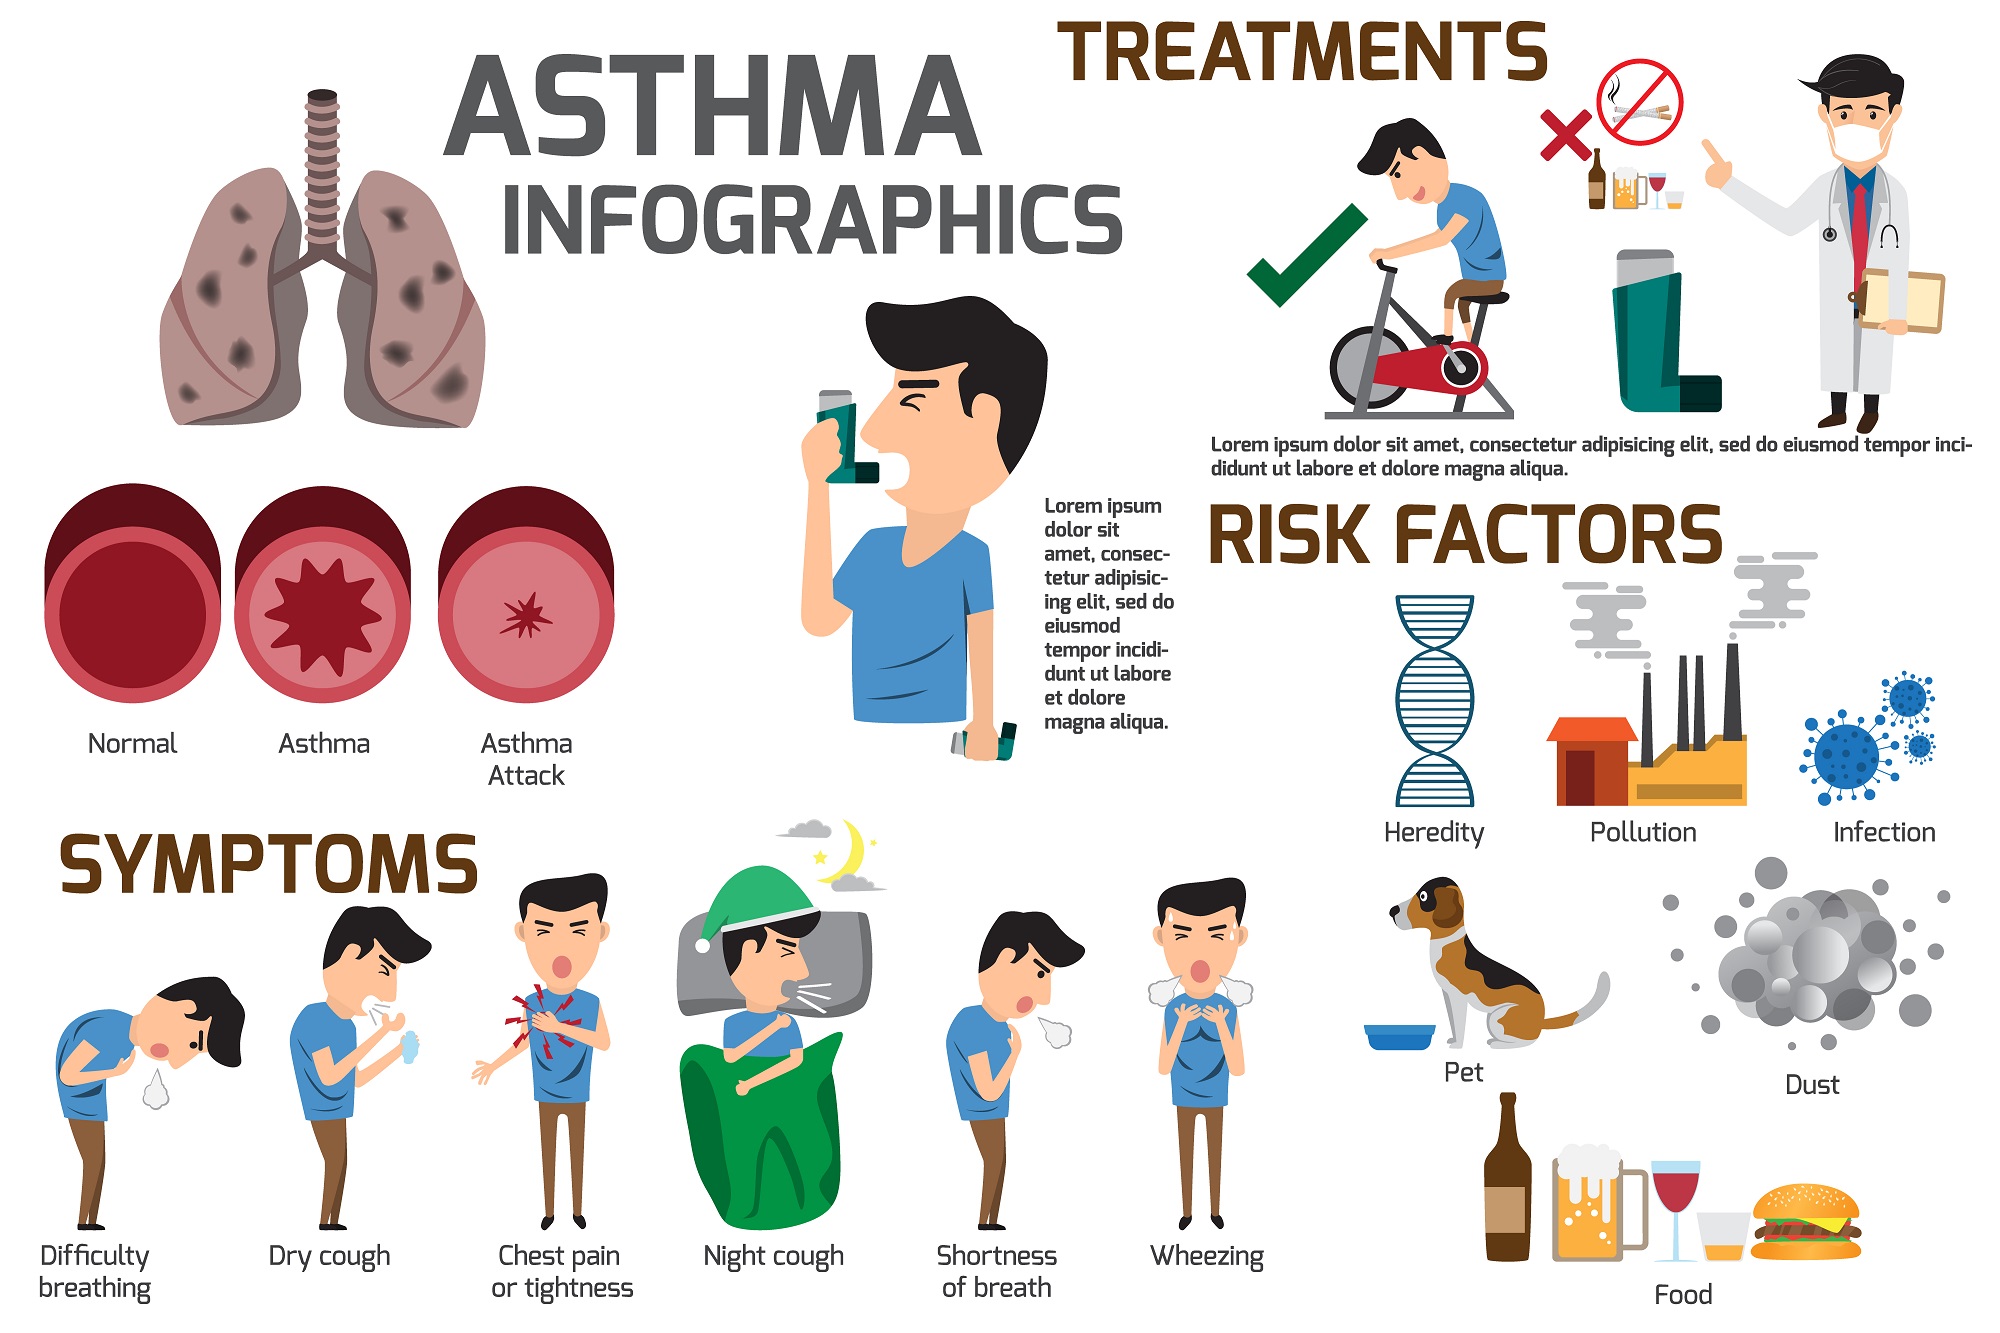 Asthma Attack Treatment